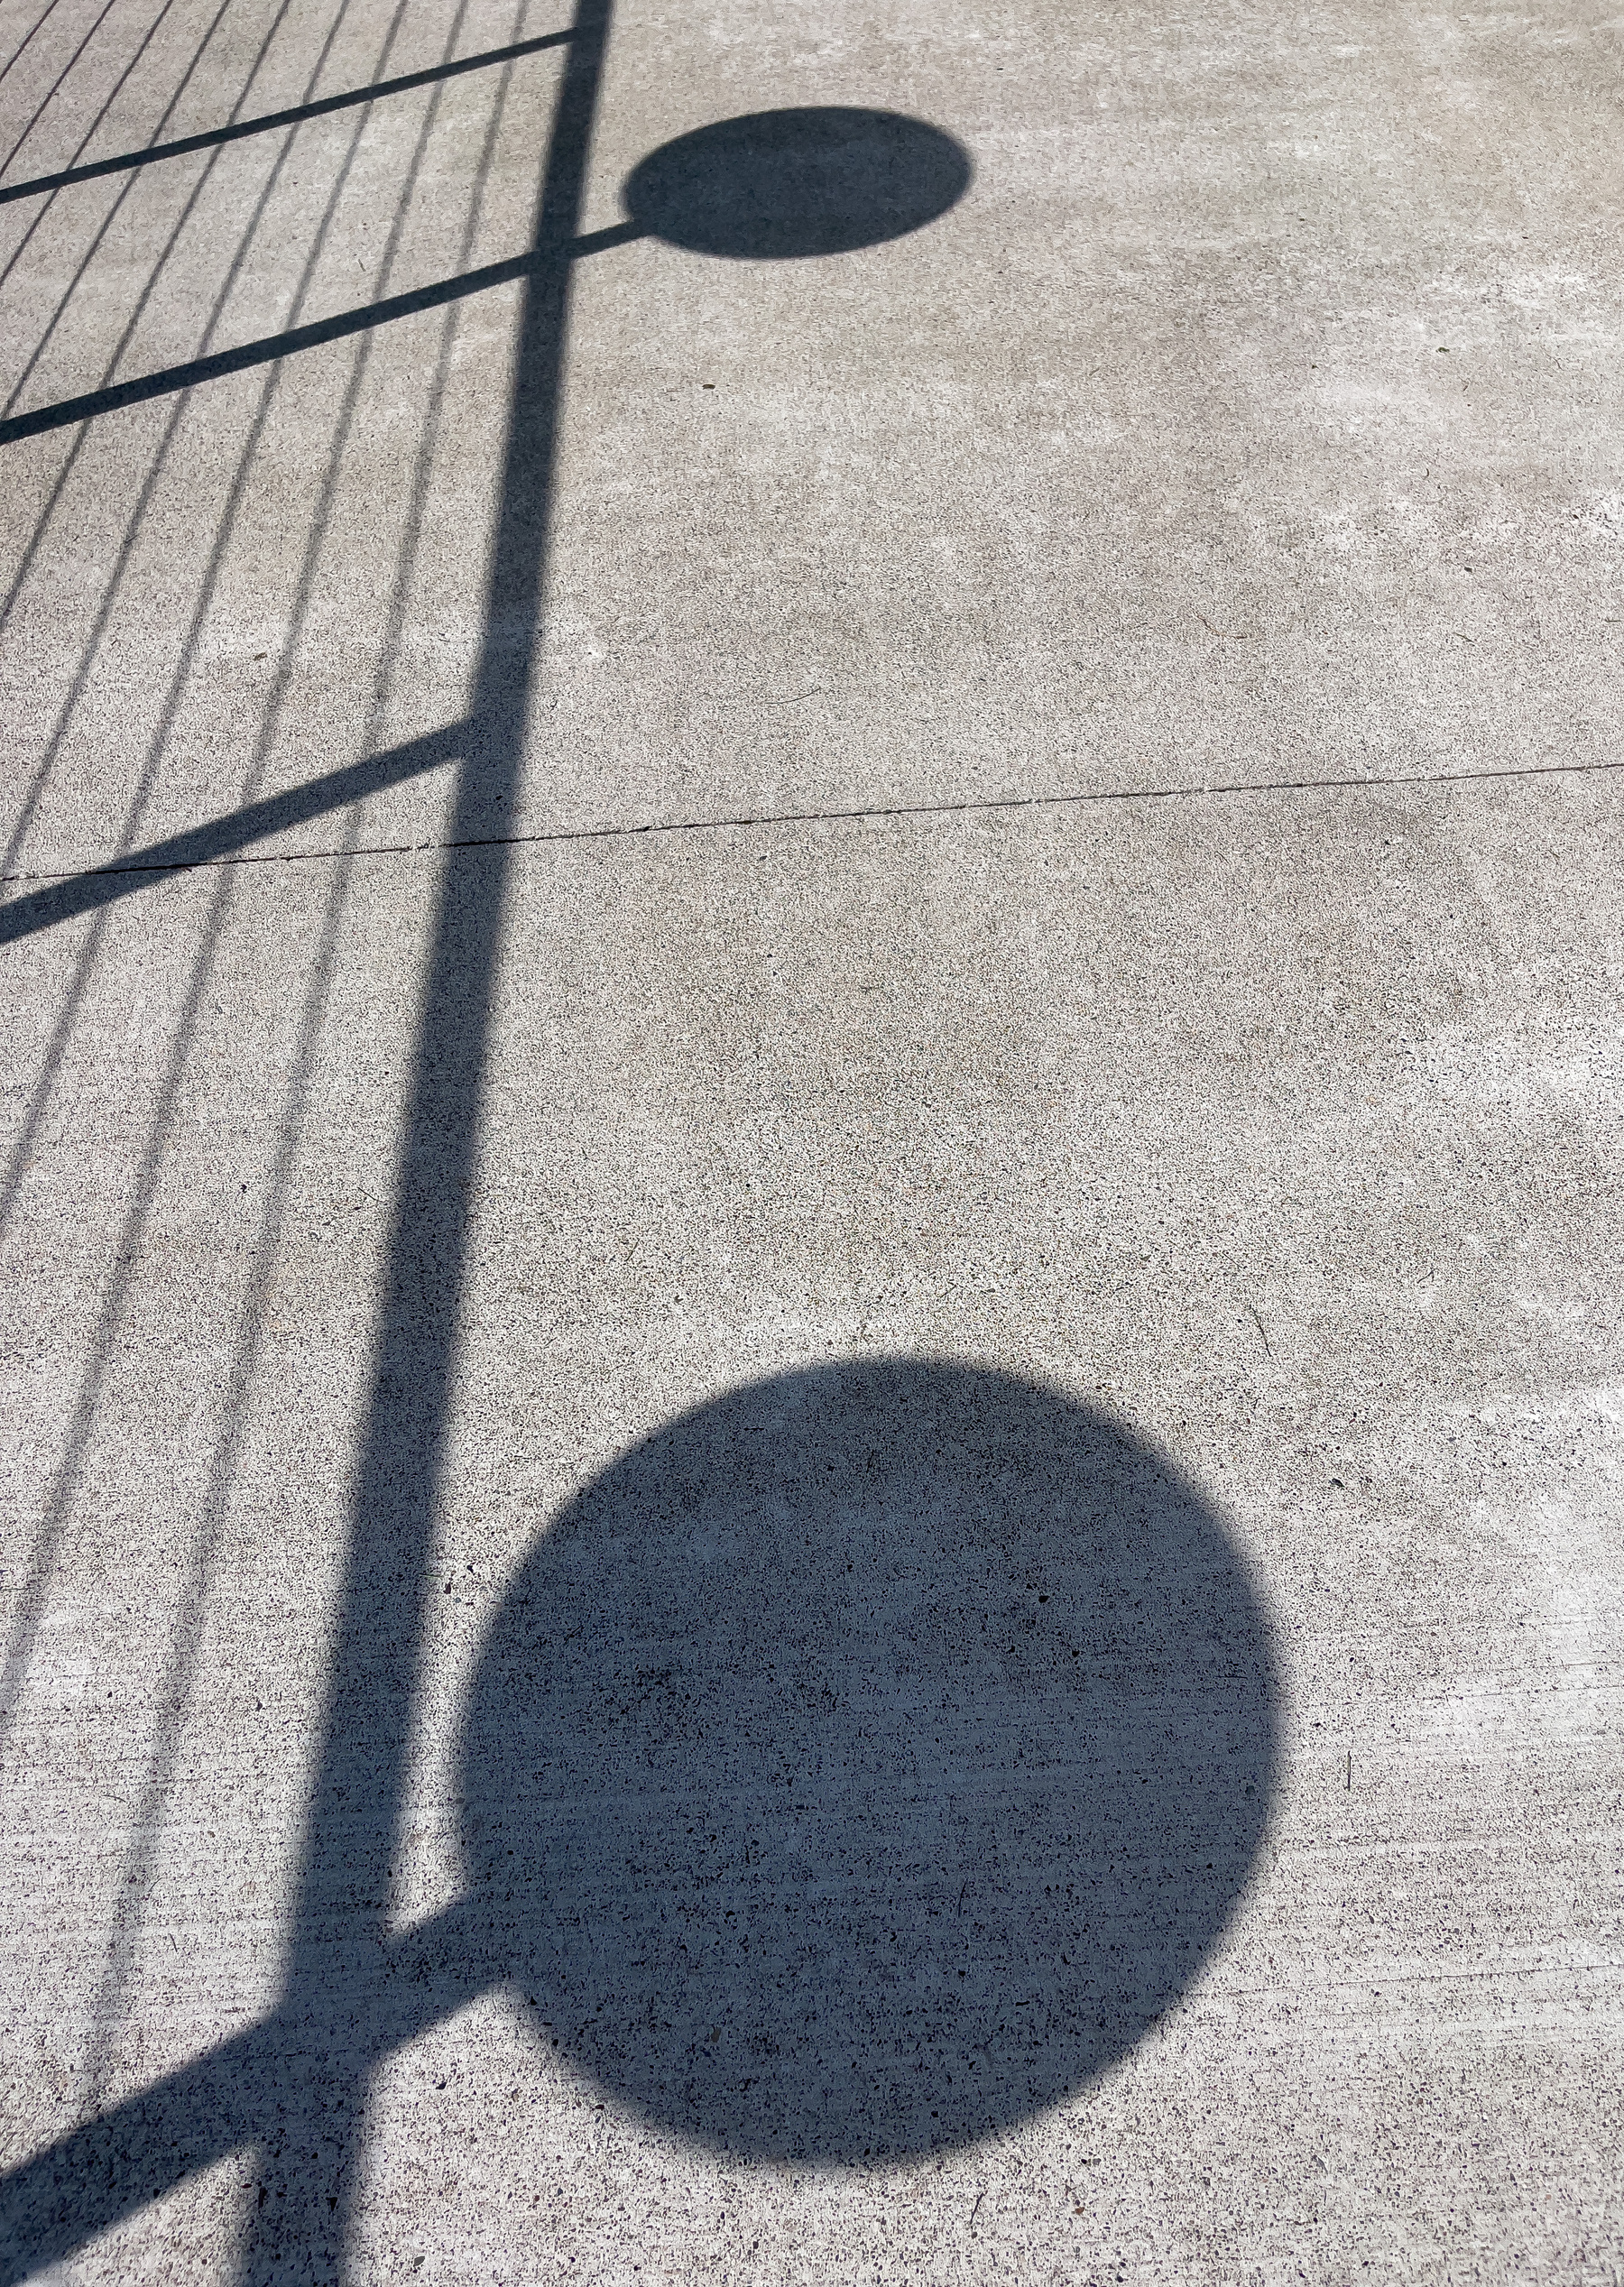 Shadow of railing and small circular tables on posts. Concrete terrace.